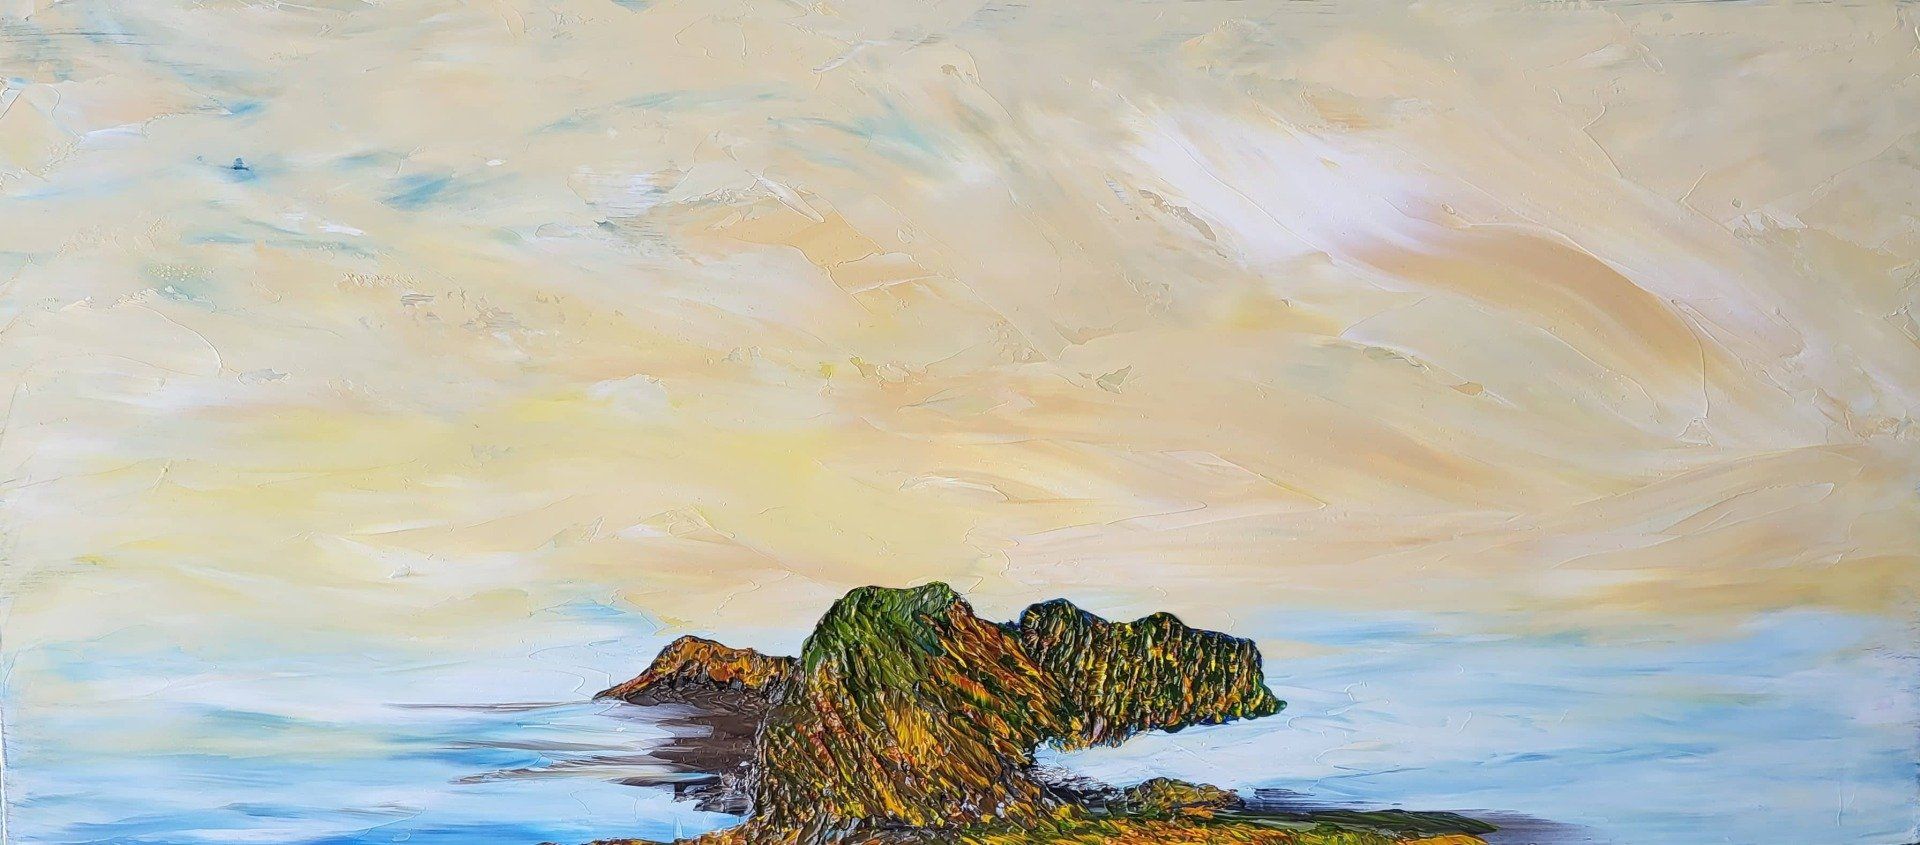 This 20 in. x 9 in. oil on Masonite depicts breaking sky with yellow sunlight and the signature colours of the collection - Naples Yellow, white, blues, and bold swatches of Buff White. The sea has calmed down, and at low tide. The vegetation is awash in can only be described as fall colours. Mountainous with hints of several access points the explorer of this Island can enjoy the hidden valleys and foliage.